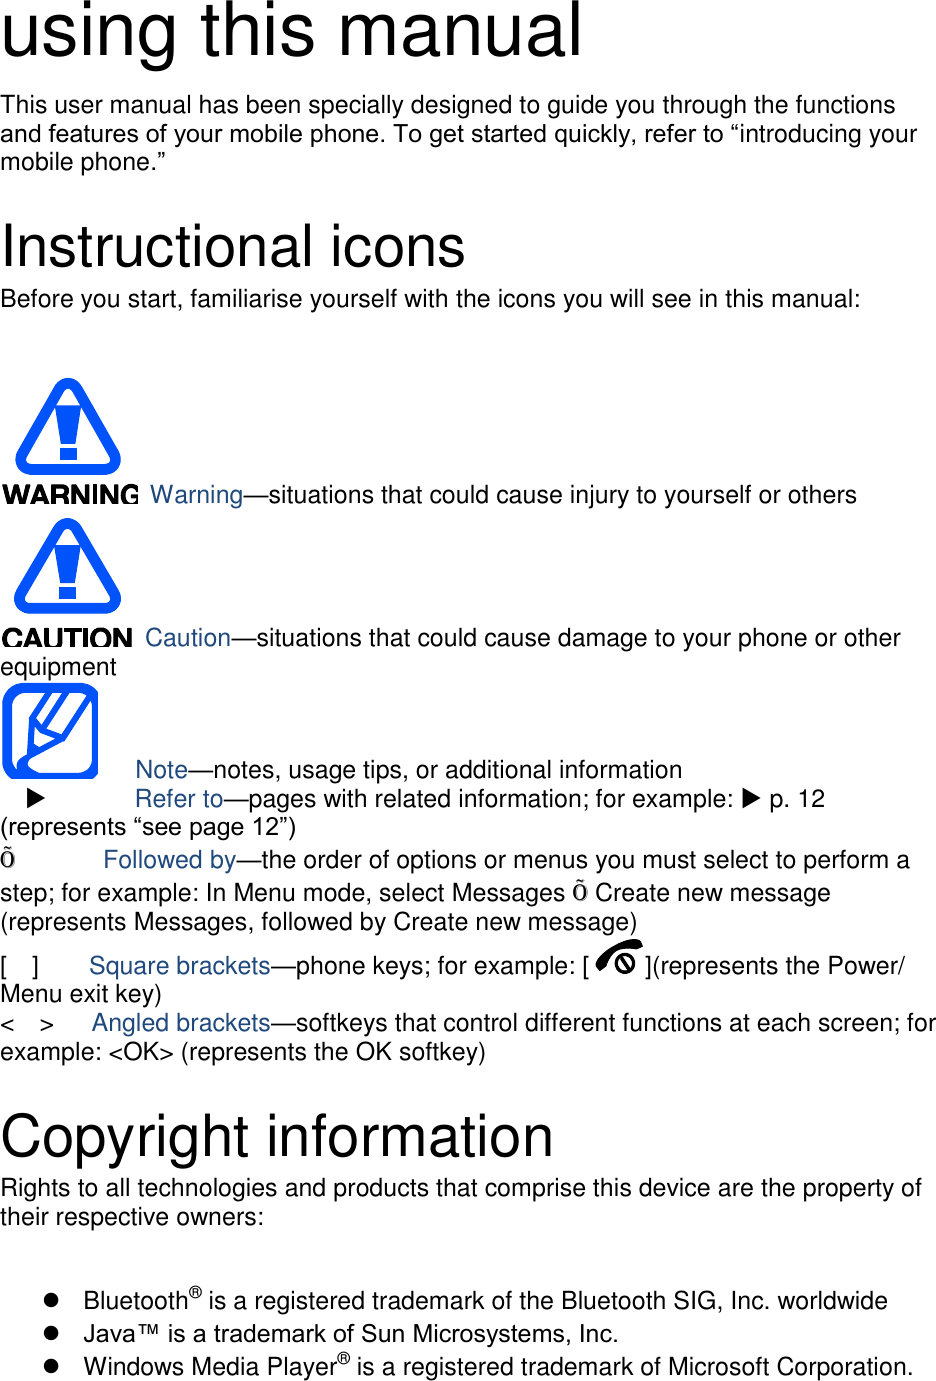 using this manual This user manual has been specially designed to guide you through the functions and features of your mobile phone. To get started quickly, refer to “introducing your mobile phone.”  Instructional icons Before you start, familiarise yourself with the icons you will see in this manual:     Warning—situations that could cause injury to yourself or others  Caution—situations that could cause damage to your phone or other equipment    Note—notes, usage tips, or additional information          Refer to—pages with related information; for example:  p. 12 (represents “see page 12”) Õ       Followed by—the order of options or menus you must select to perform a step; for example: In Menu mode, select Messages Õ Create new message (represents Messages, followed by Create new message) [    ]    Square brackets—phone keys; for example: [ ](represents the Power/ Menu exit key) &lt;    &gt;    Angled brackets—softkeys that control different functions at each screen; for example: &lt;OK&gt; (represents the OK softkey)  Copyright information Rights to all technologies and products that comprise this device are the property of their respective owners:    Bluetooth® is a registered trademark of the Bluetooth SIG, Inc. worldwide  Java™ is a trademark of Sun Microsystems, Inc.   Windows Media Player® is a registered trademark of Microsoft Corporation. 